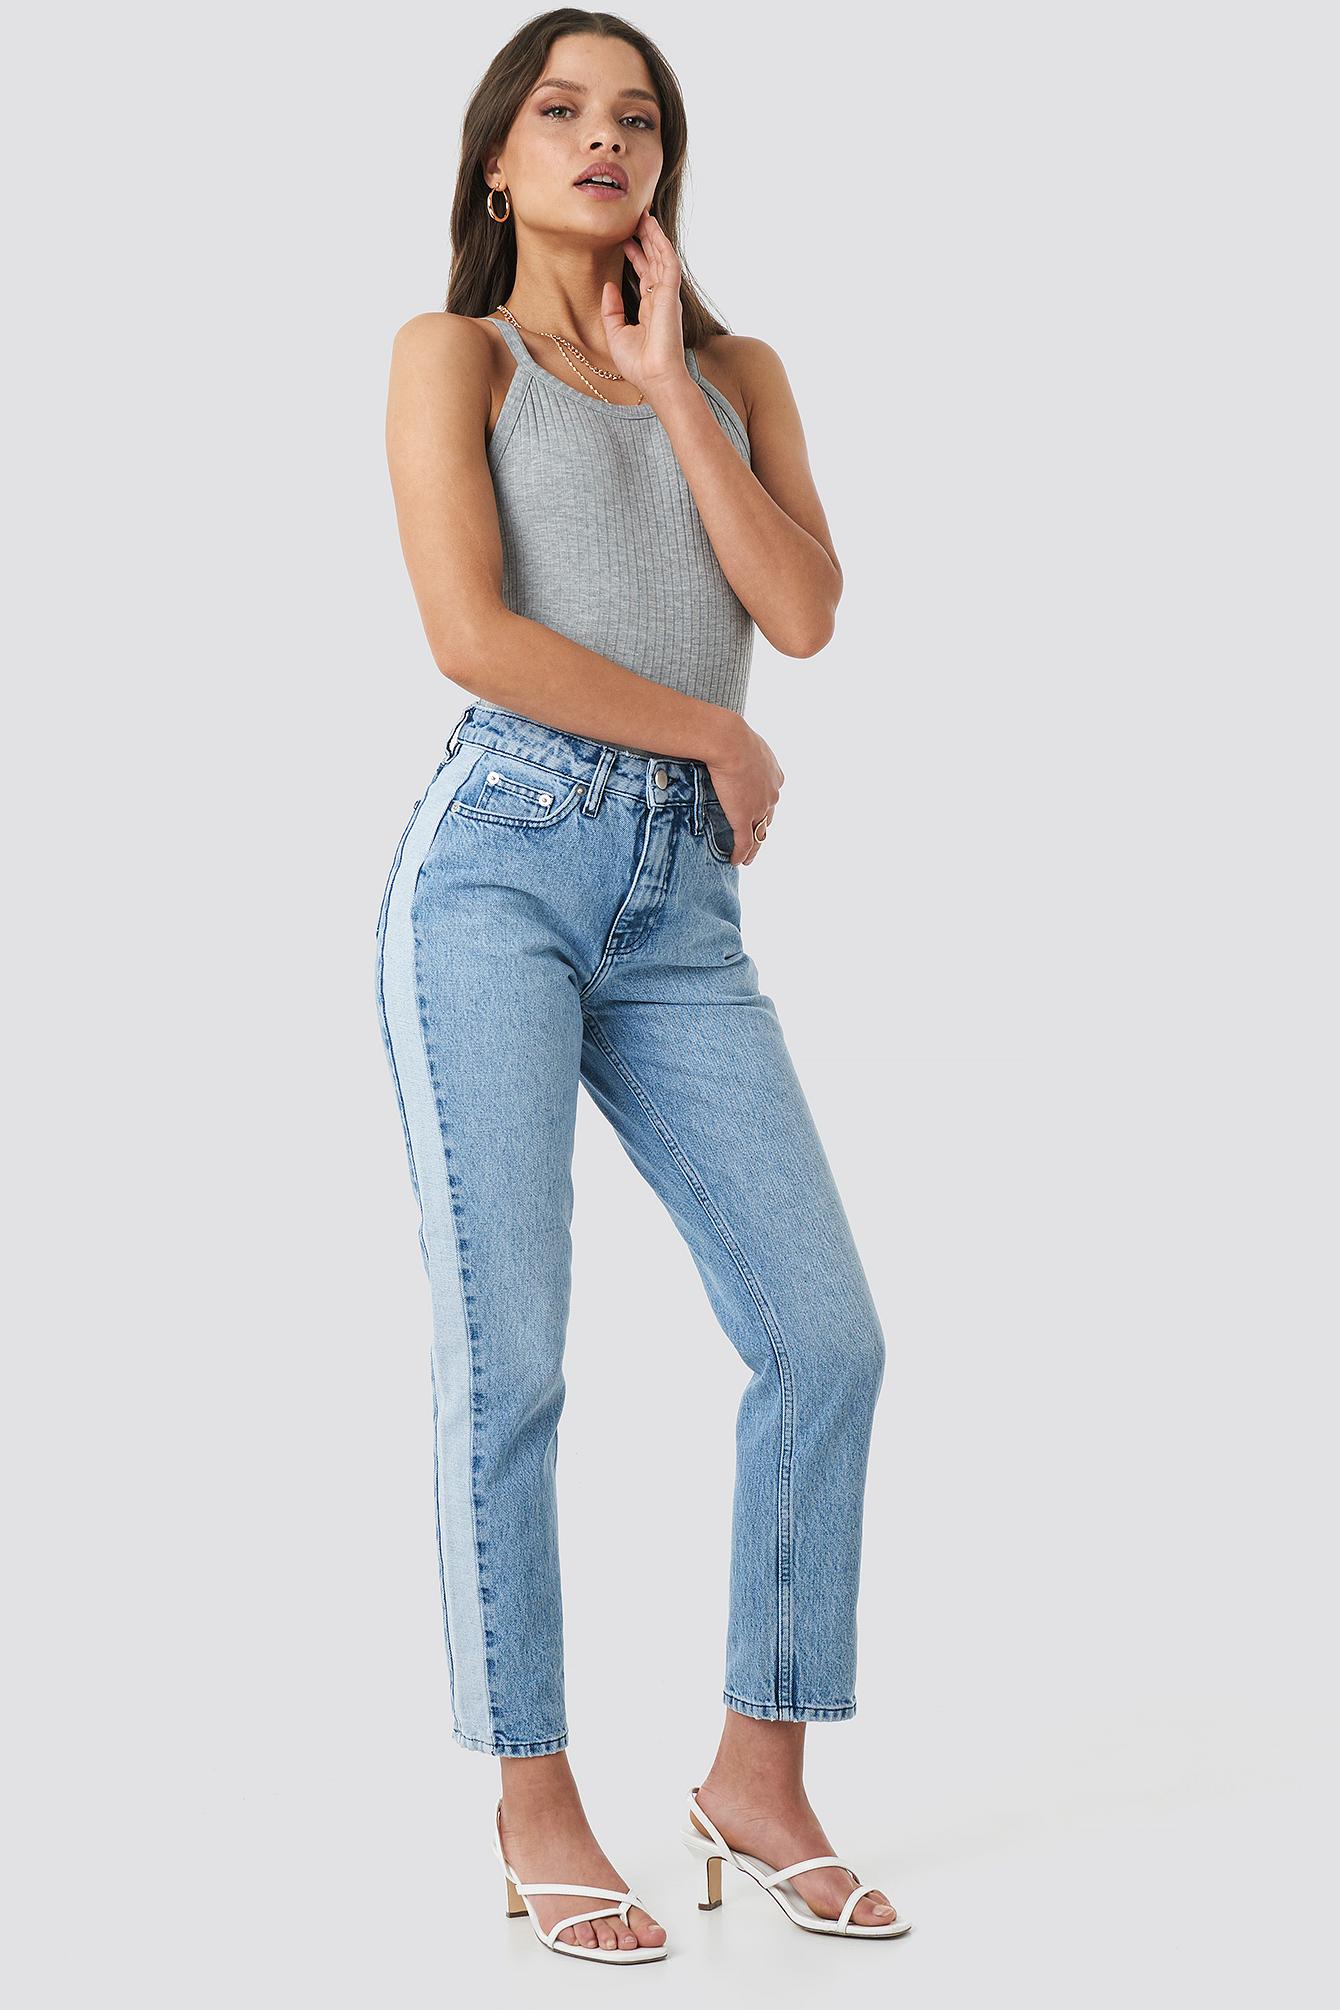 NA-KD patchwork denim straight leg pants in blue - part of a set